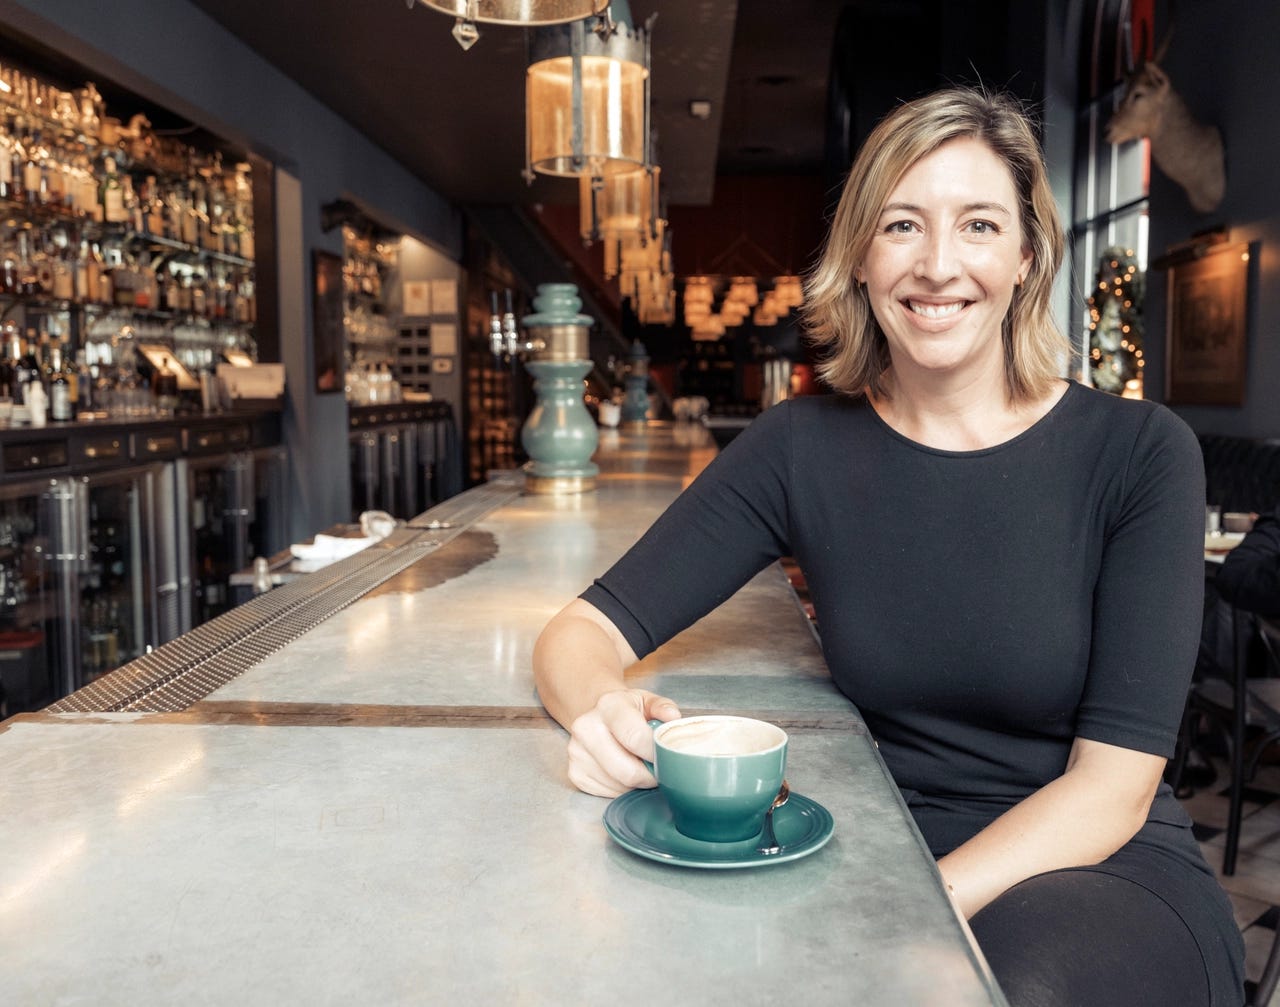 Photograph of Molly Wood sitting on a high stool at a bar with a cup of coffee. She is looking at the camera with her right hand on the handle of the cup which has a saucer and a spoon on the saucer.